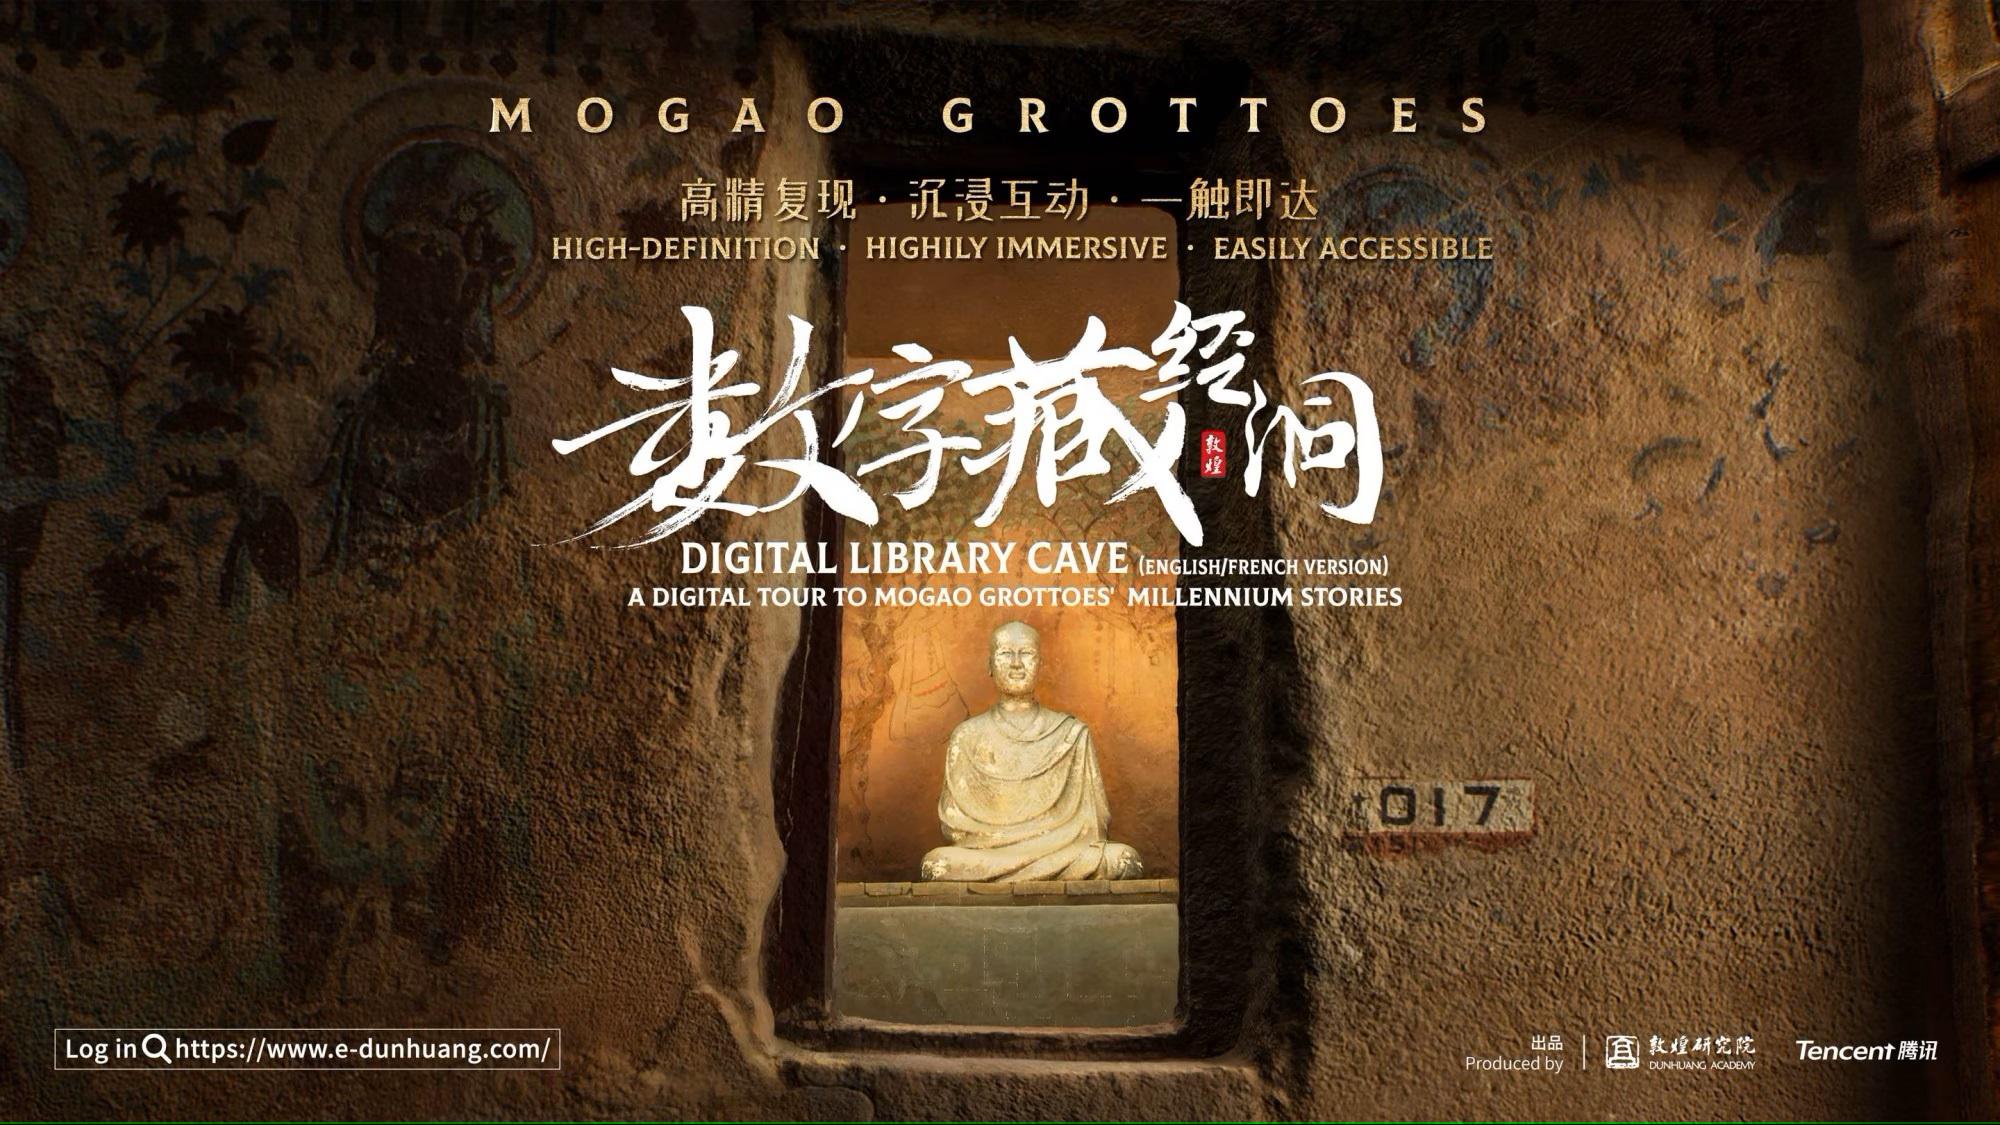 Tencent's gaming technology transforms Mogao Caves into an immersive digital experience